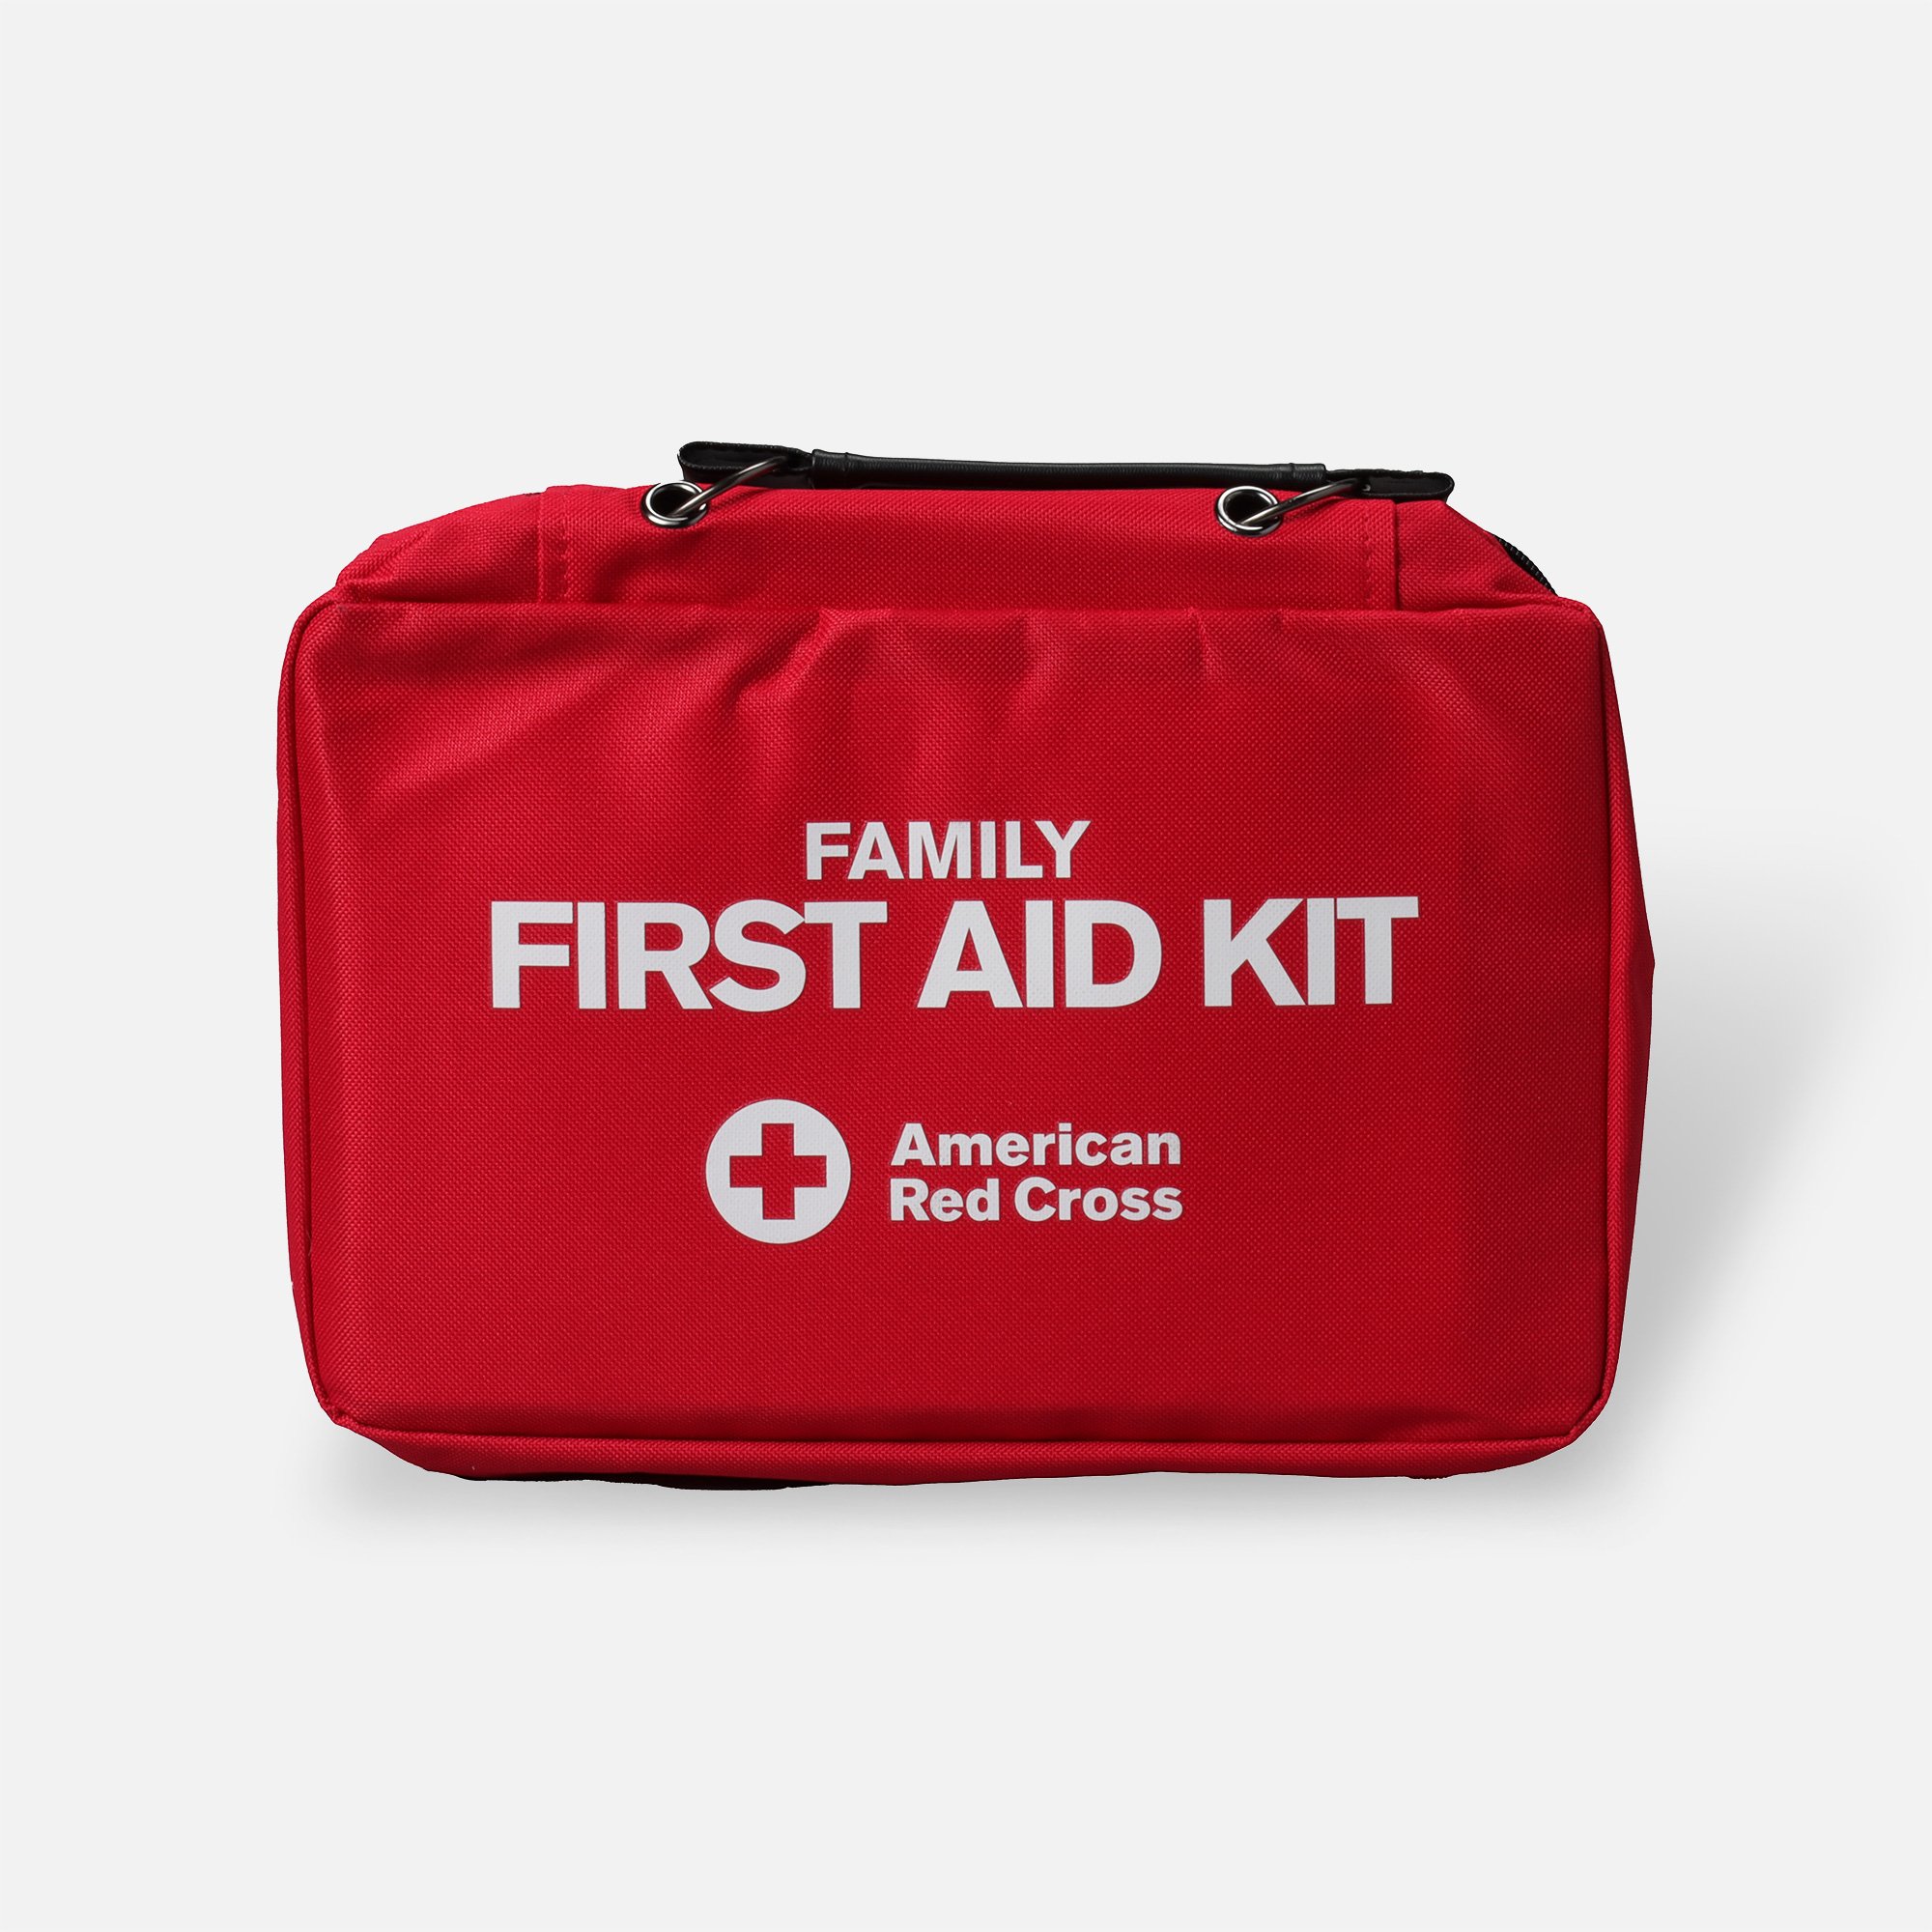 https://fsastore.com/on/demandware.static/-/Sites-hec-master/default/dwcbc784e9/images/large/american-red-cross-deluxe-family-first-aid-kit-24836-1.jpg